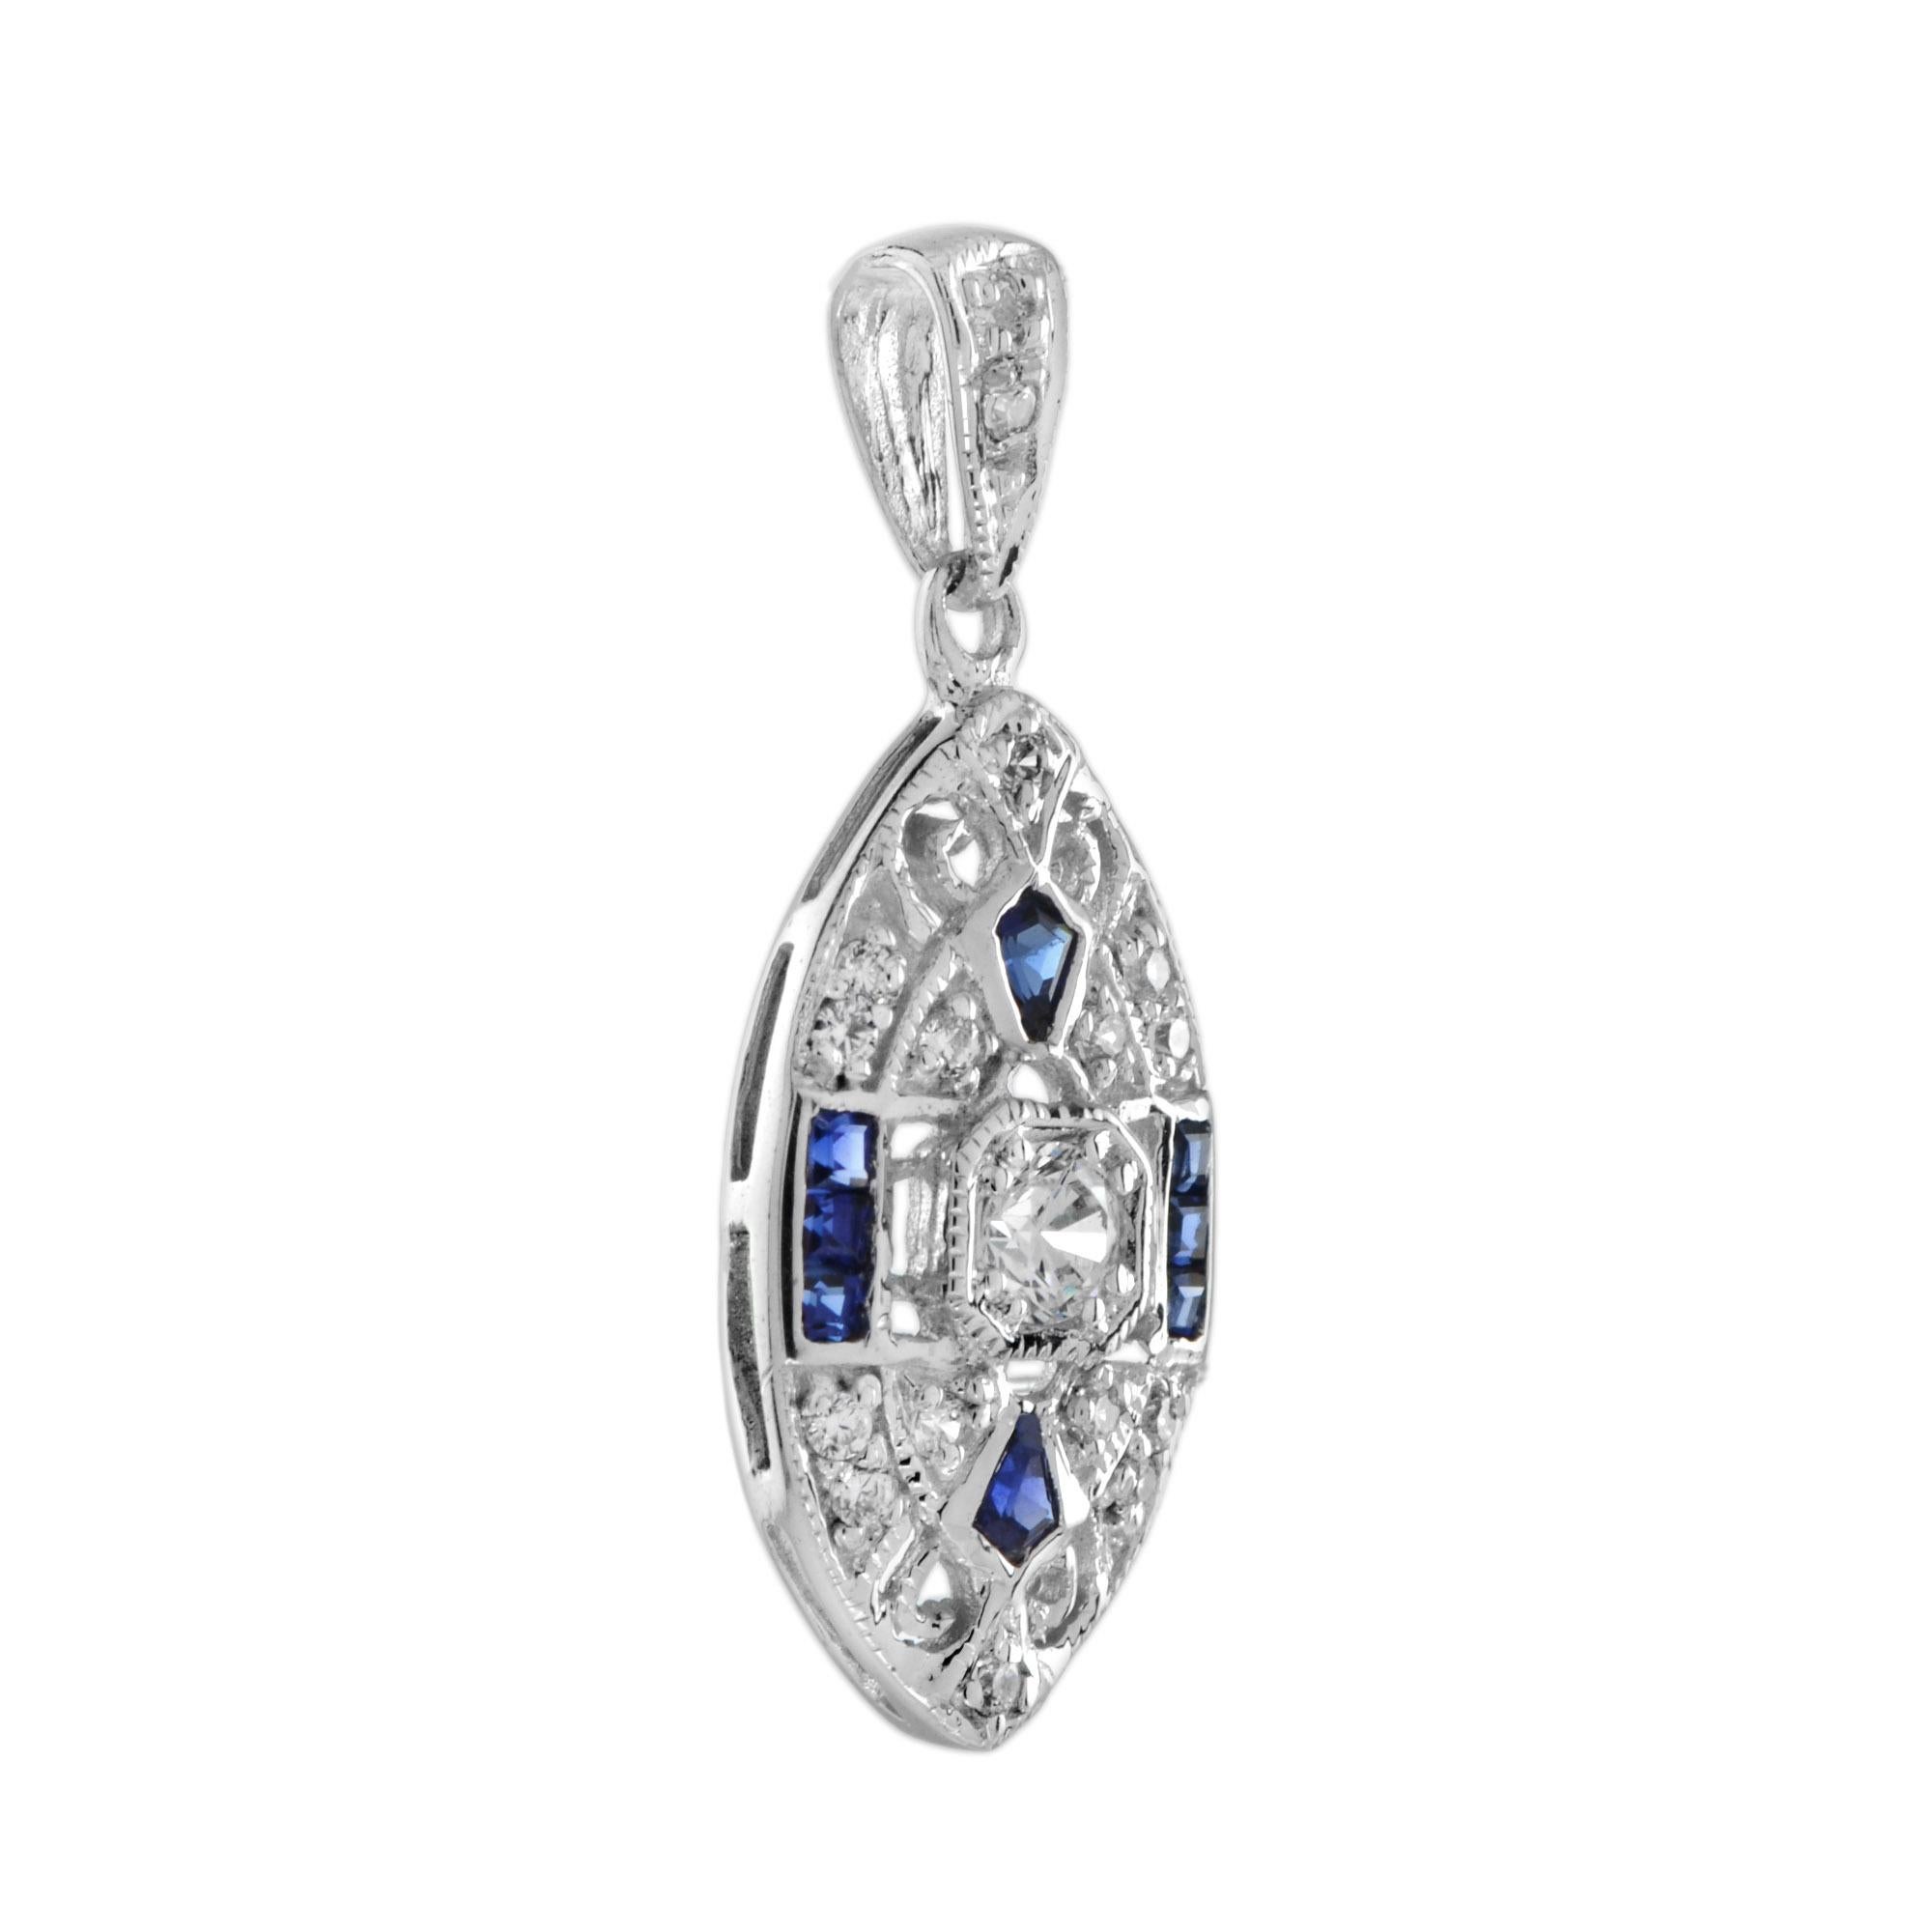 An Art Deco style sapphire and diamond pendant, set with French cut sapphires and round cut diamonds. Mounted in 18k white gold.

Information
Metal: 18K White Gold
Width: 9 mm.
Length: 25 mm.
Weight: 1.90 g. (approx. total weight)

Center